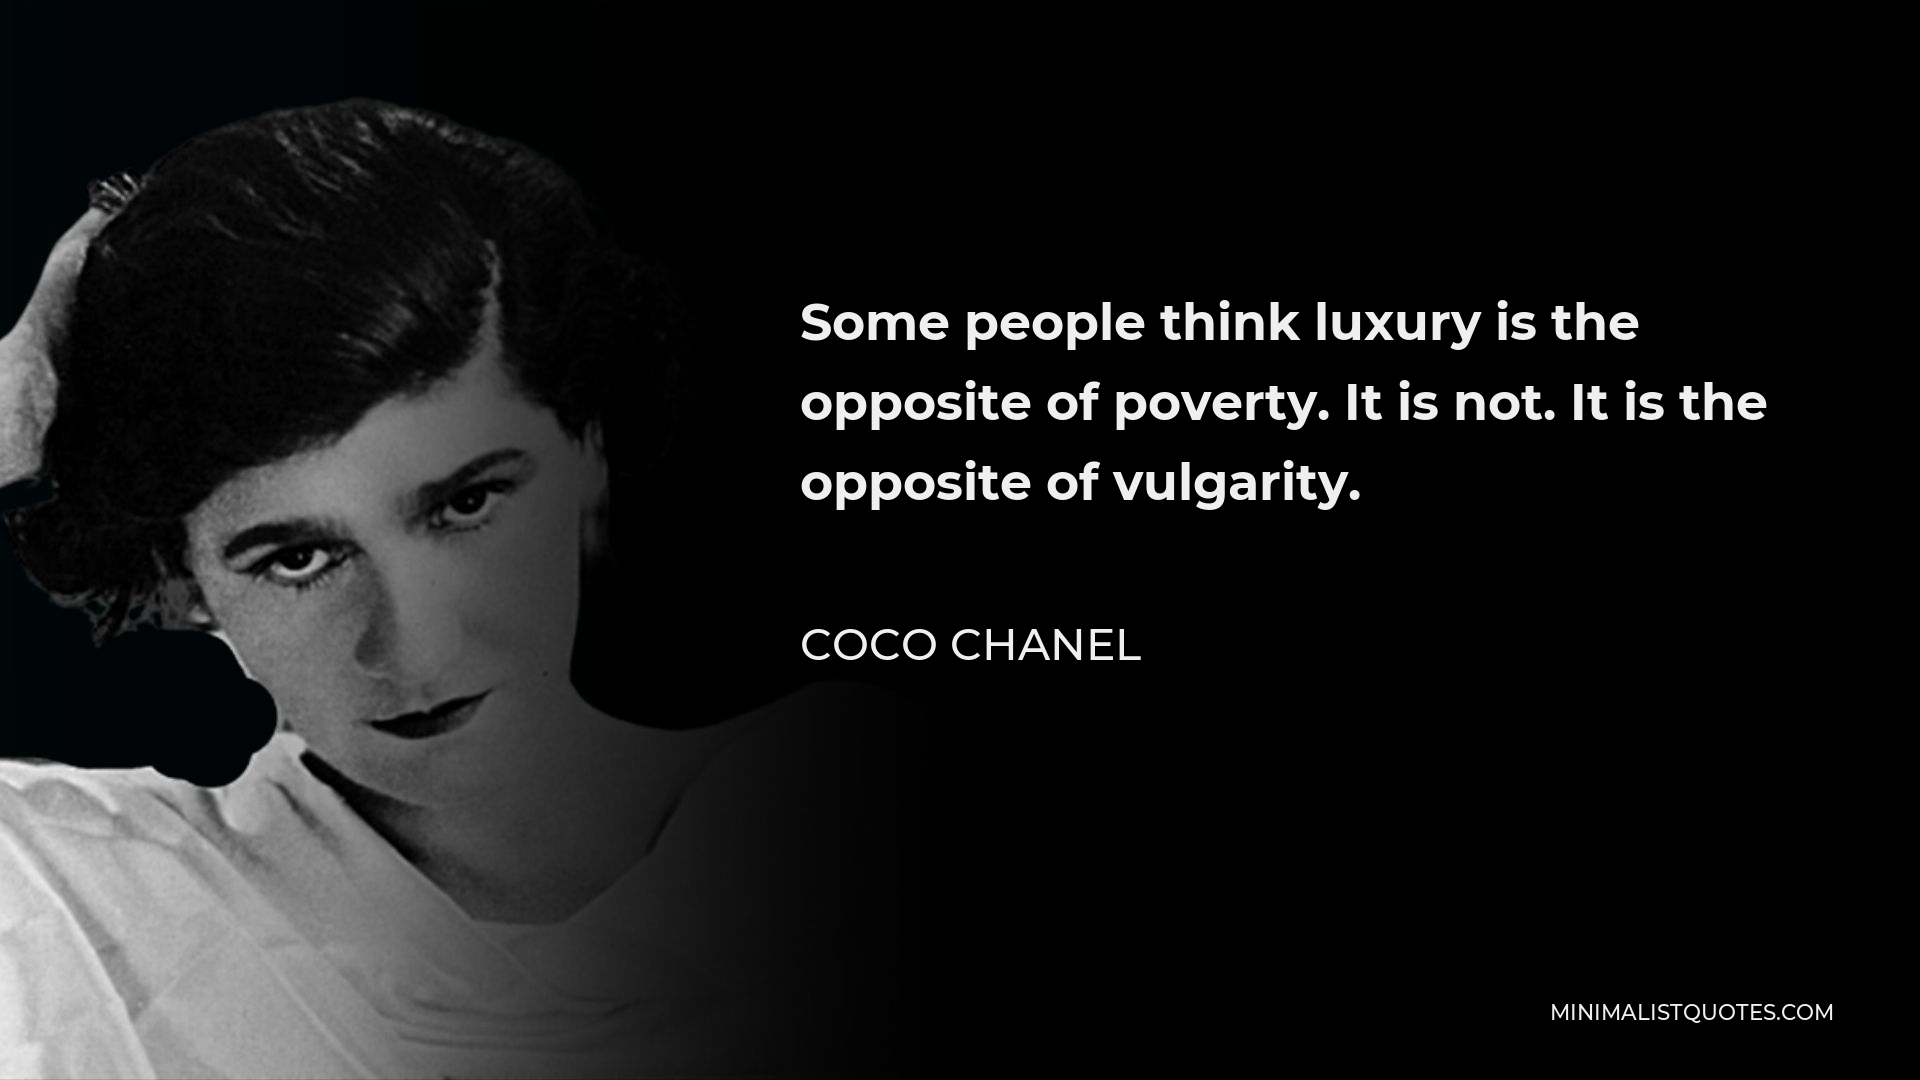 Coco Chanel Quote - Some people think luxury is the opposite of poverty. It is not. It is the opposite of vulgarity.